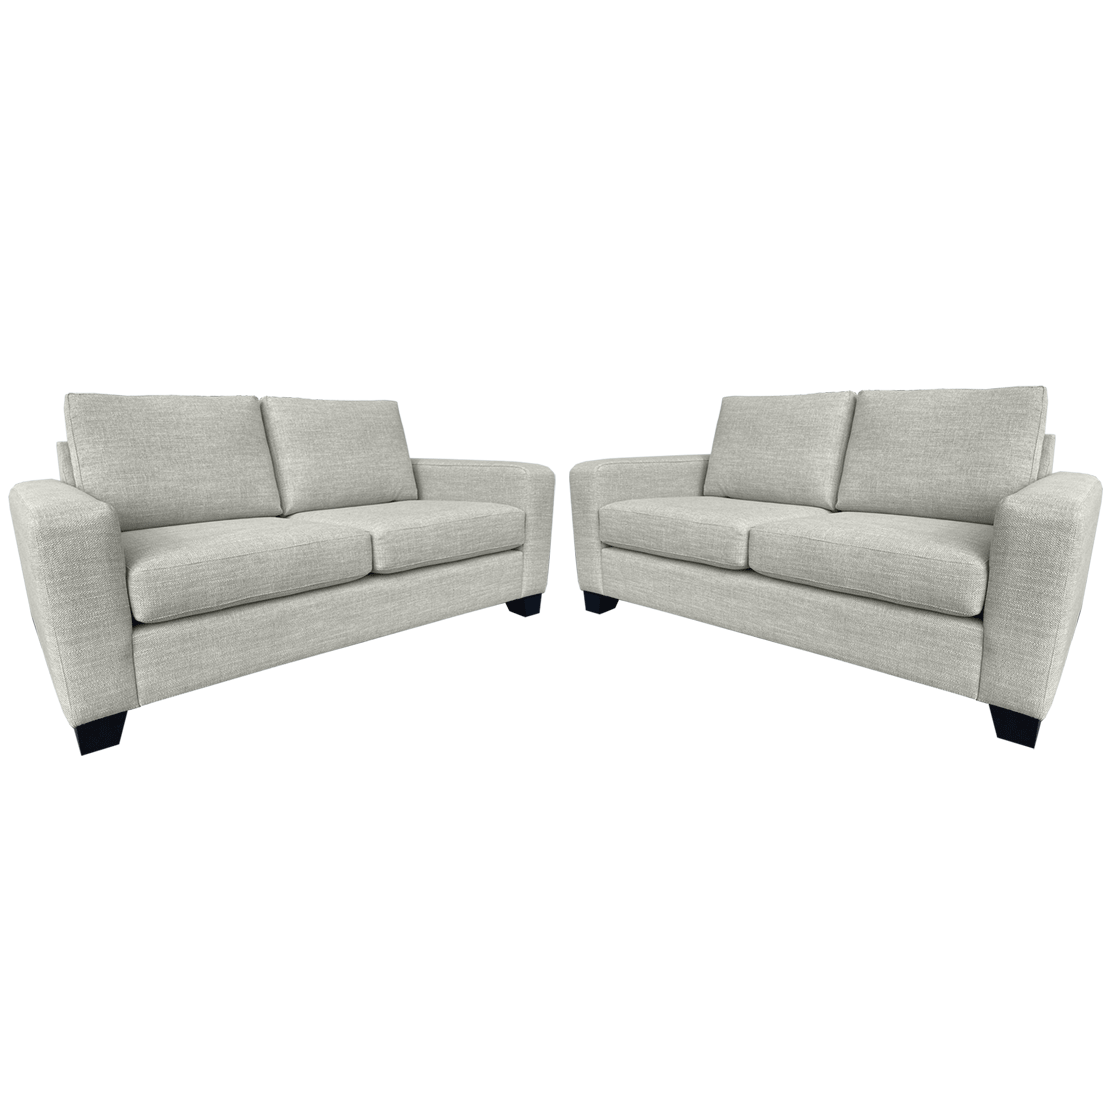 Bellamy 3 + 2.5 Seater Lounge Suite - NZ Made - Weave Fabric